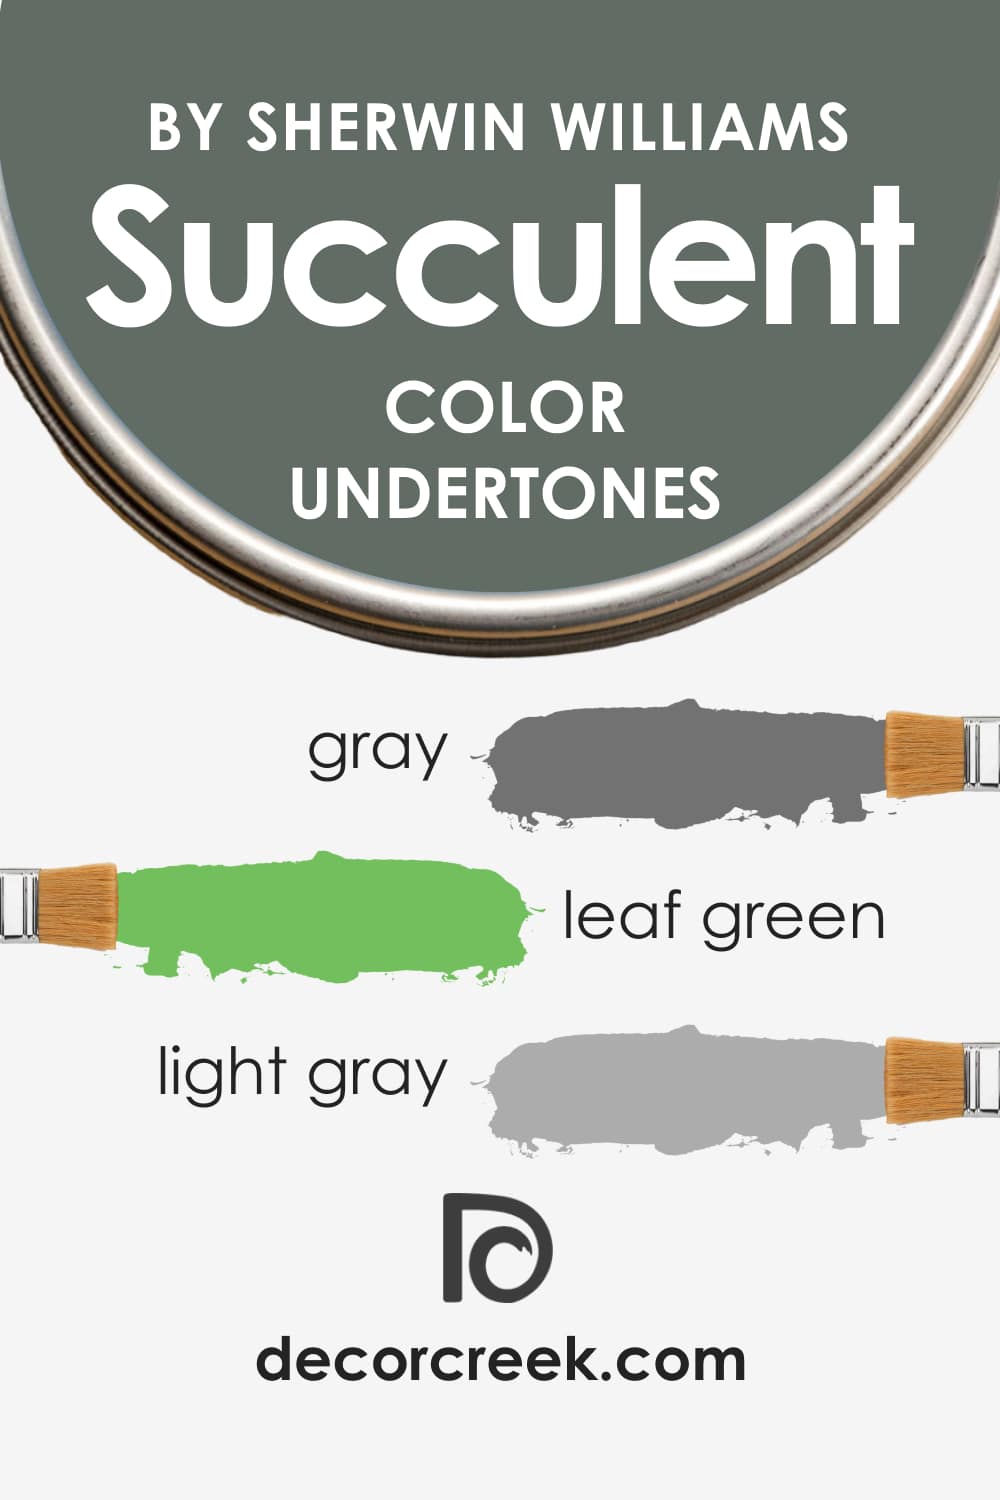 What Undertones Does Succulent SW-9650 By Sherwin-Williams Have?